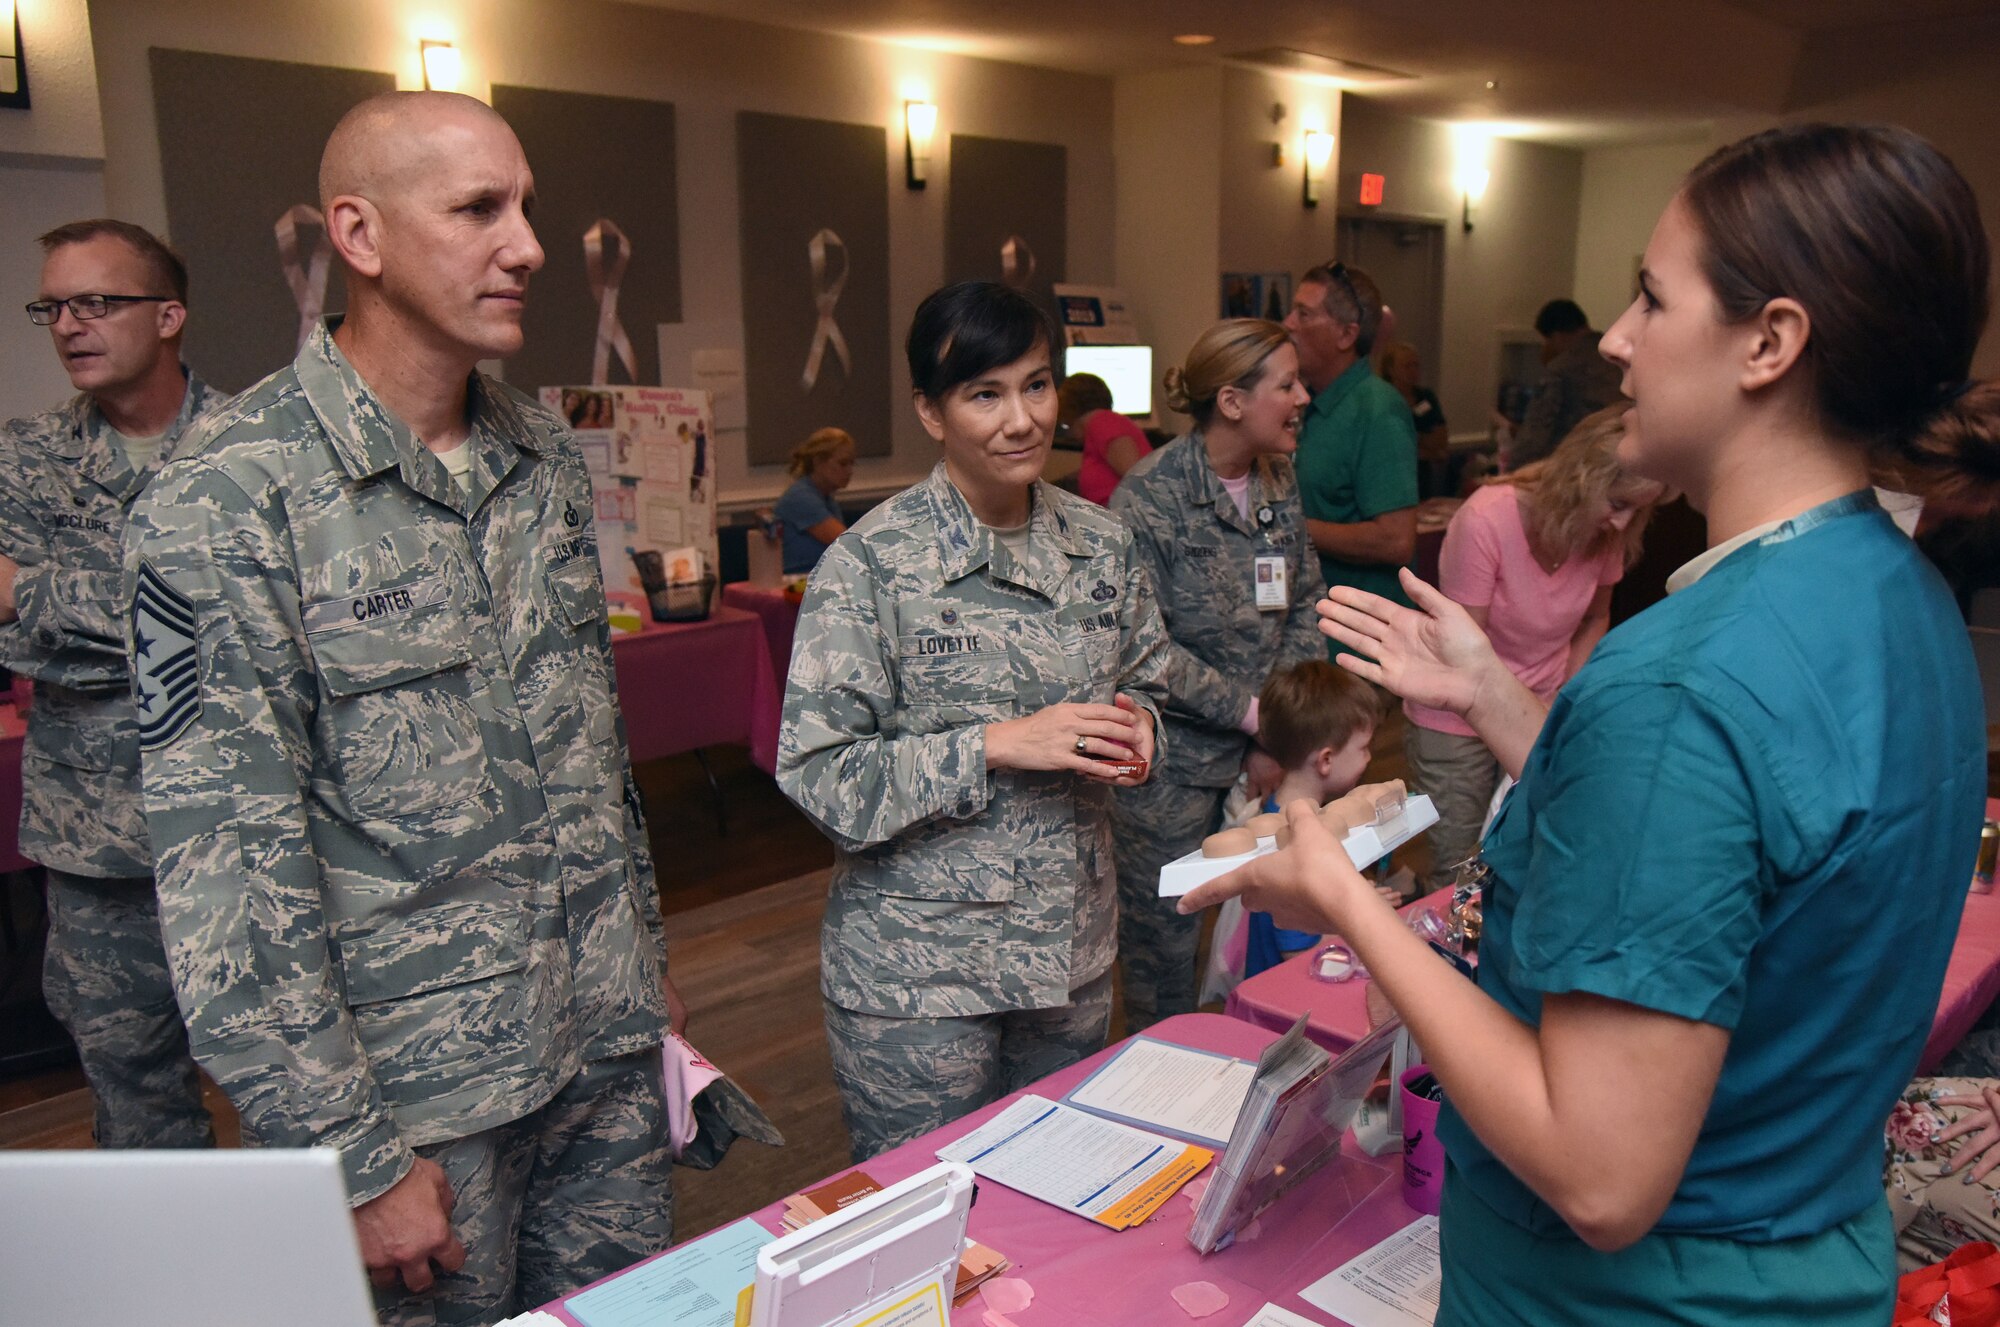 U.S. Air Force Staff Sgt. Hallie Neel, 81st Surgical Operations Squadron urology technician, provides a brief urology overview to Chief Master Sgt. Kenneth Carter, 81st Training Wing command chief, and Col. Debra Lovette, 81st TRW commander, during the 7th Annual Mammothon Cancer Screening and Preventative Health Fair inside the Don Wylie Auditorium on Keesler Air Force Base, Mississippi, Oct. 19, 2018. The 81st Medical Group hosted the walk-in event which included screenings for multiple types of cancer and chronic diseases in honor of Breast Cancer Awareness Month. (U.S. Air Force photo by Kemberly Groue)